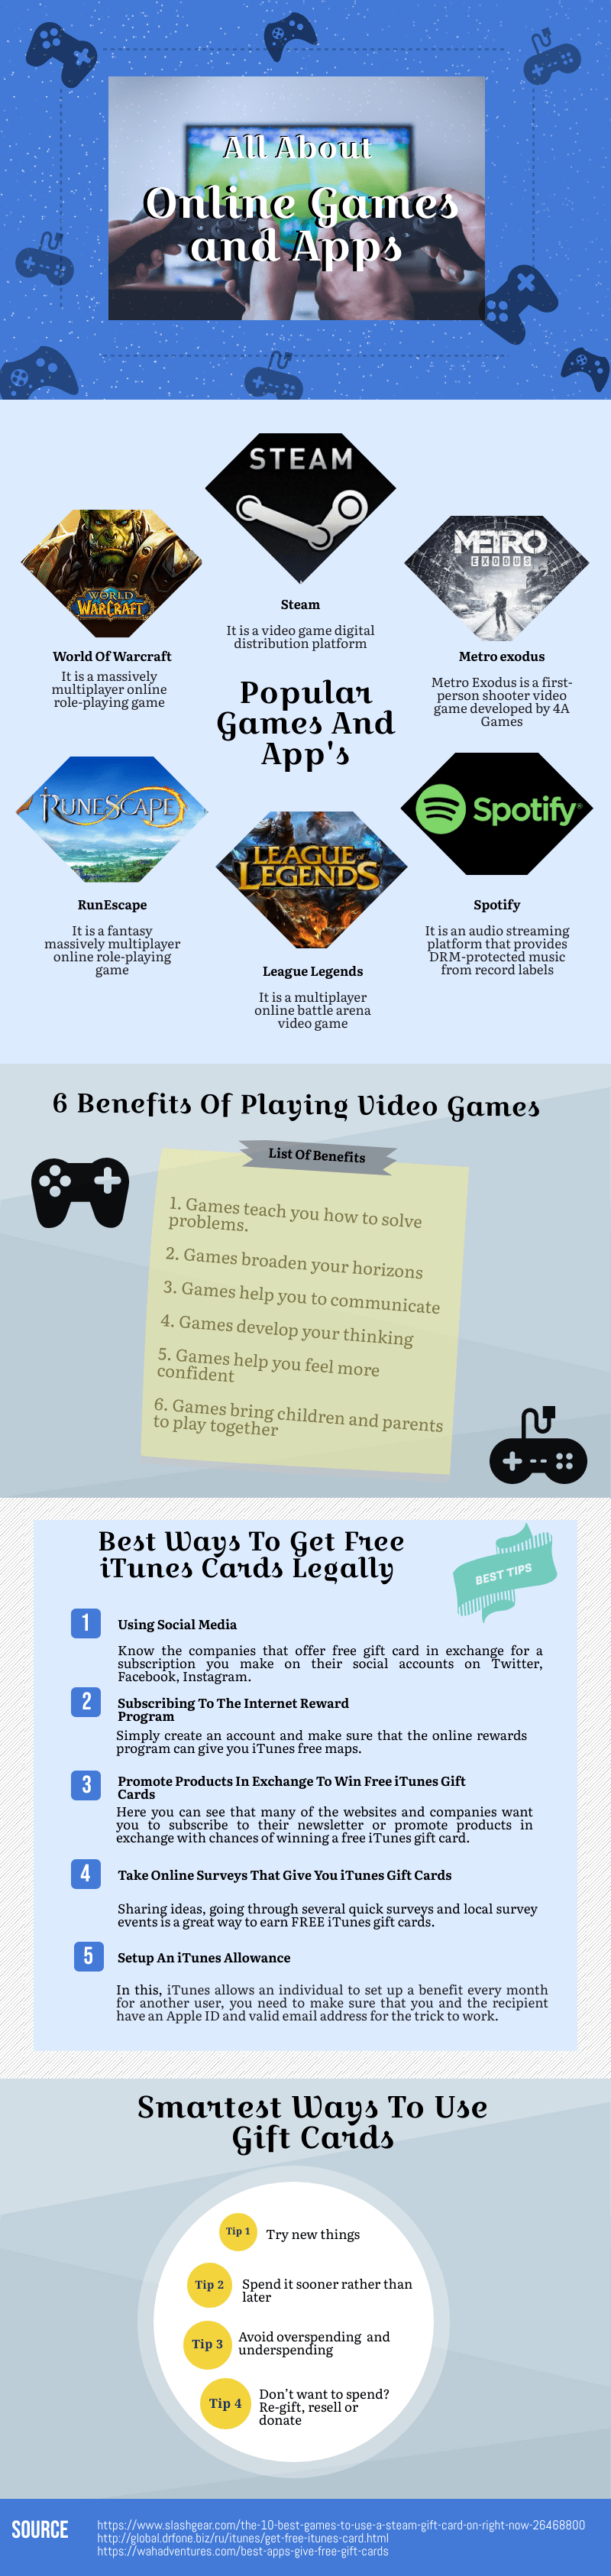 benefits of playing video games